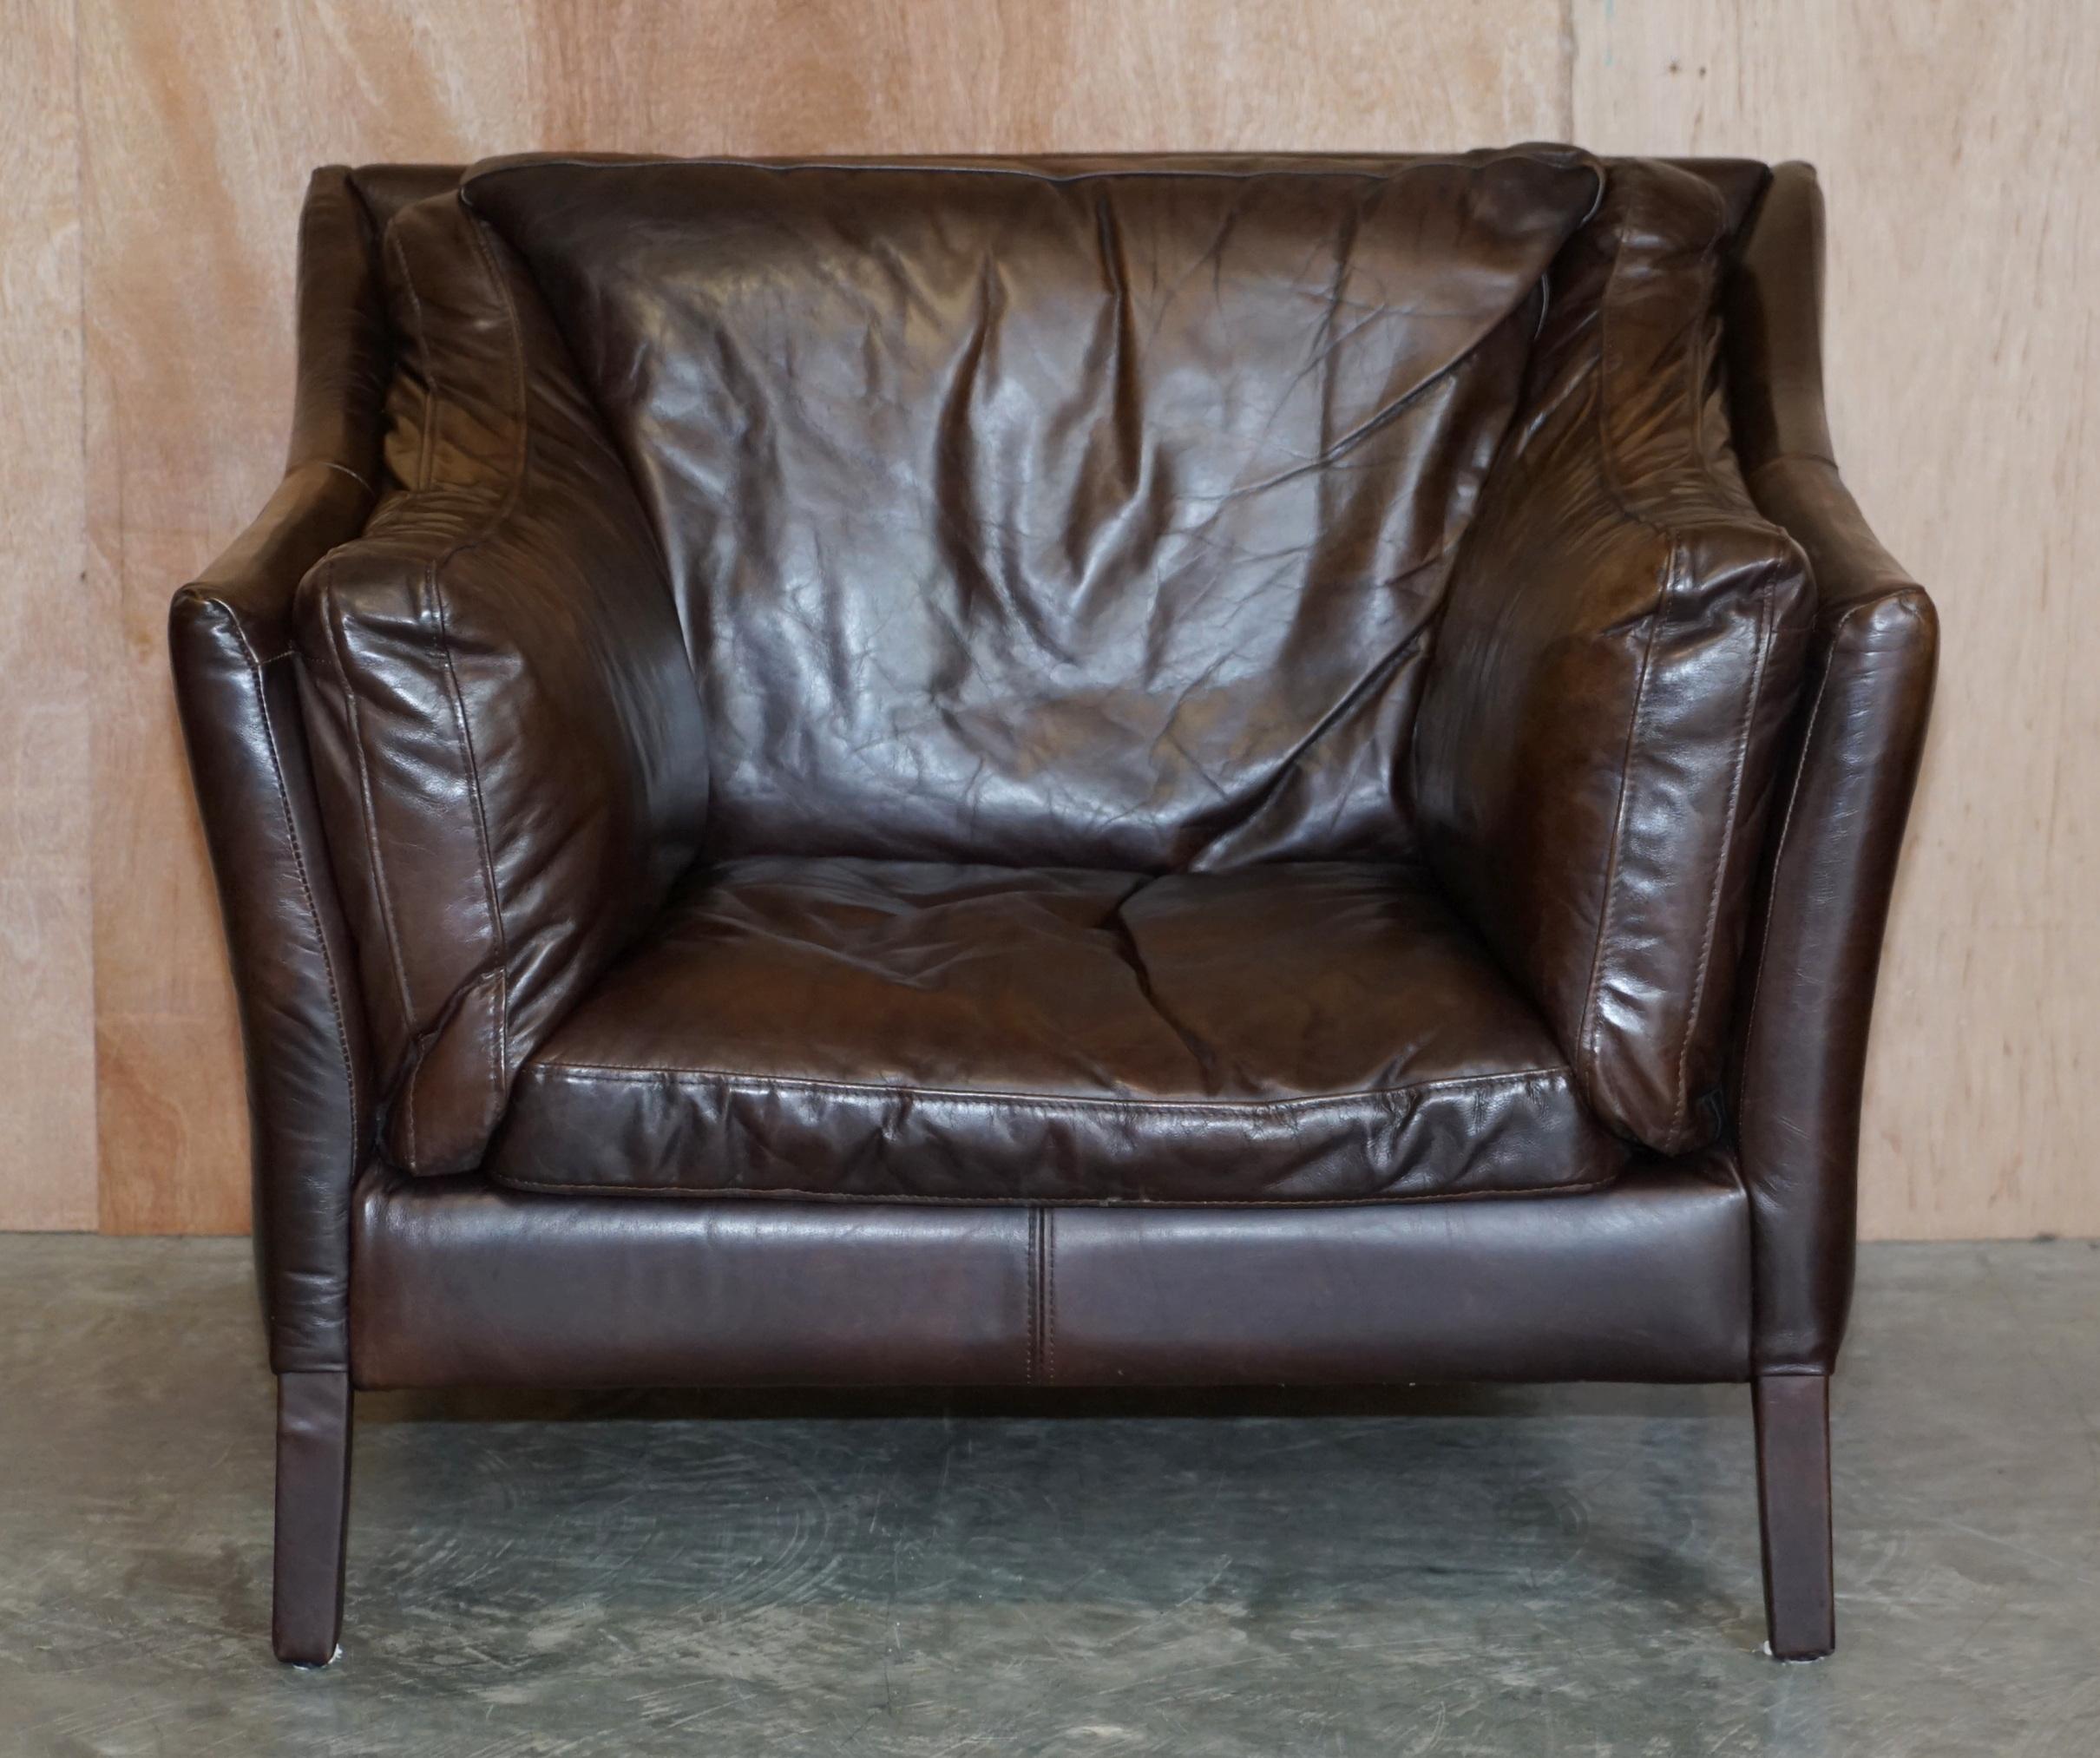 We are delighted to offer this Halo Biker tan brown leather large armchair or love seat

This armchair is in good used condition, we have cleaned waxed and polished it from top to bottom. Bike tan leather is a heritage leather so it looks vintage